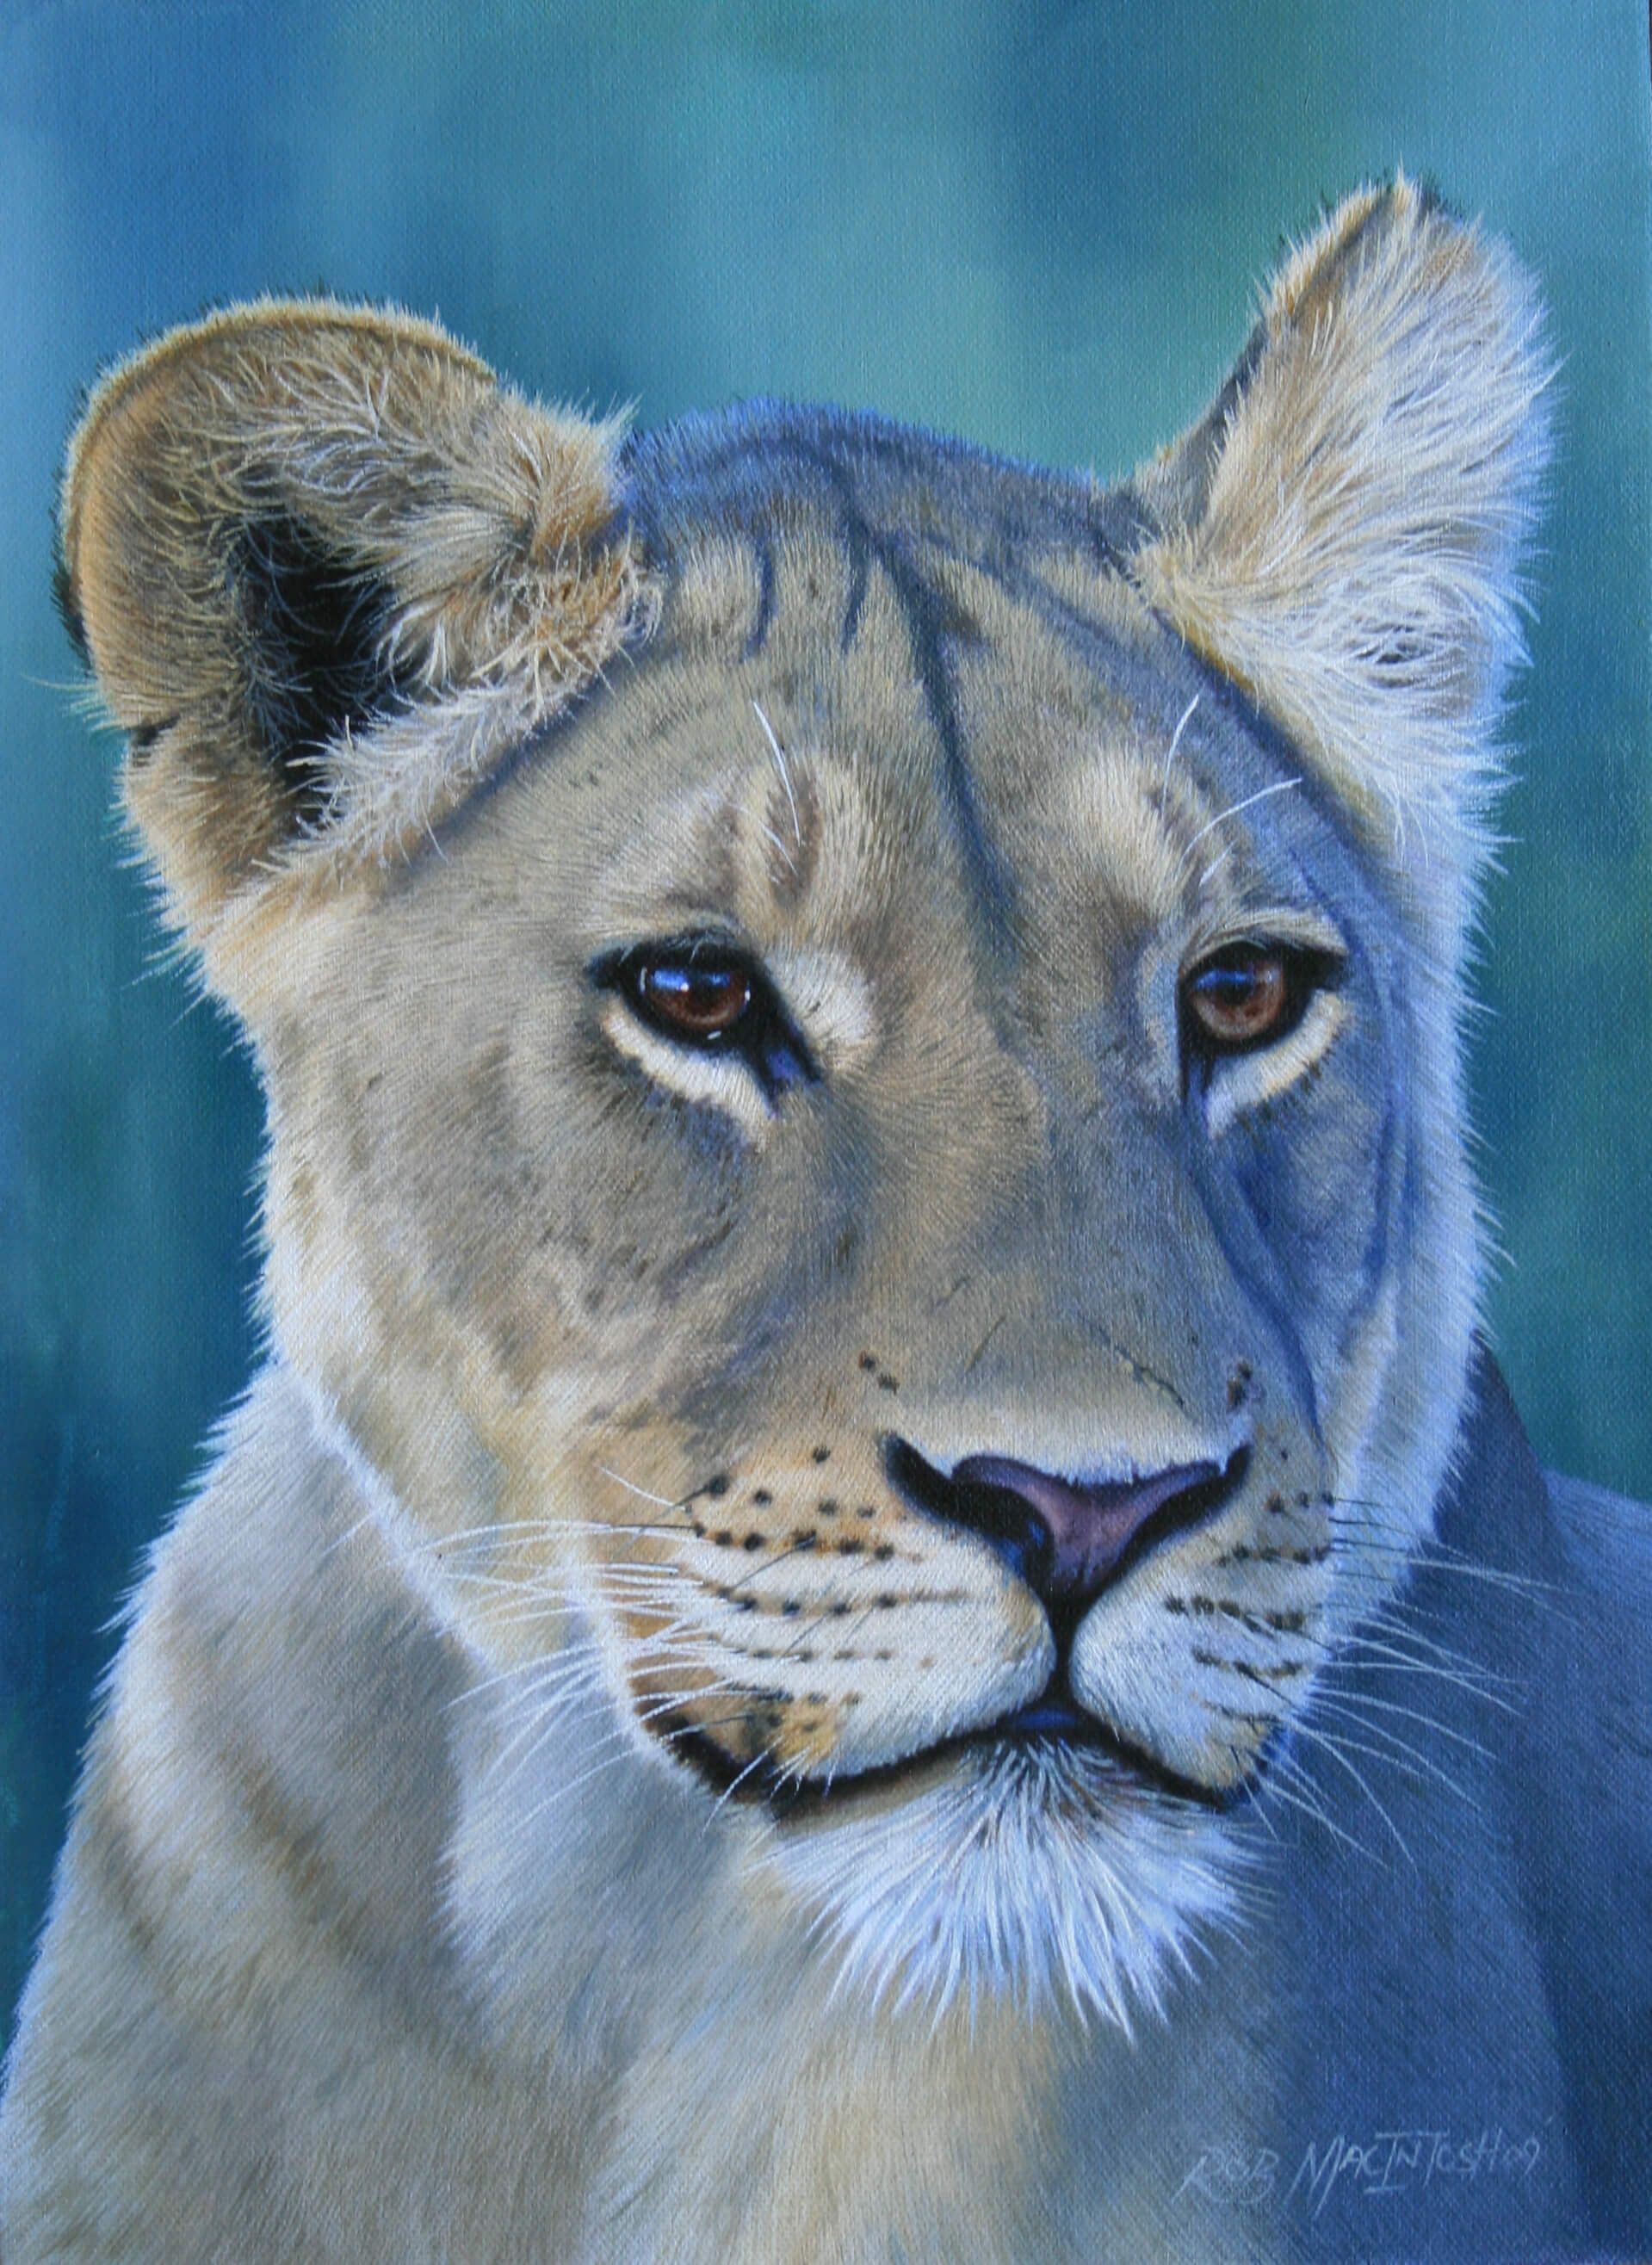 Photorealistic painting of a portrait of a lioness